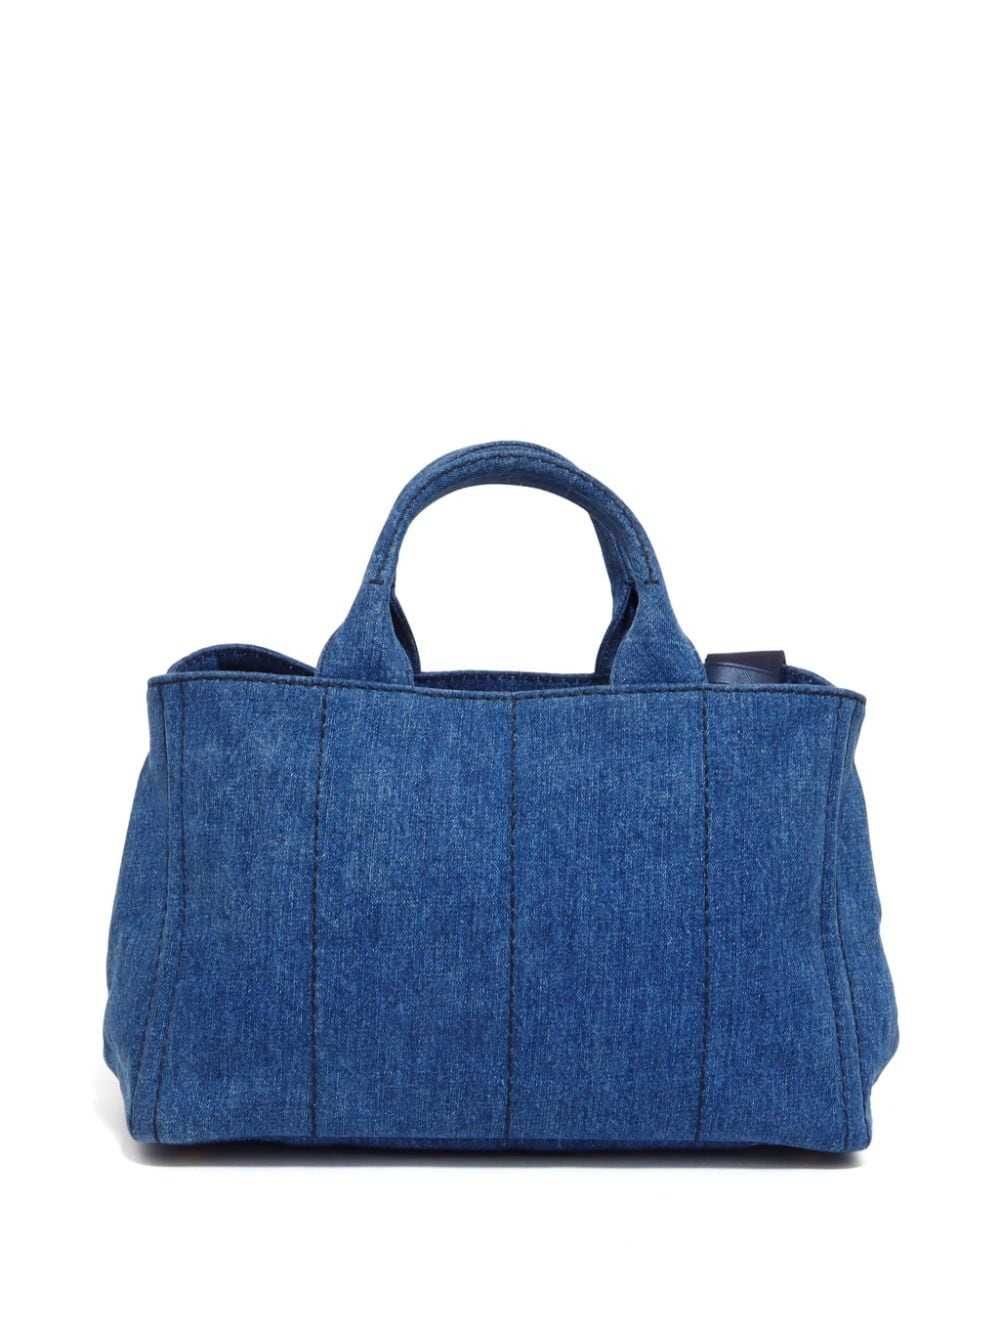 Prada Pre-Owned 2000s Canapa two-way bag - Blue - image 2